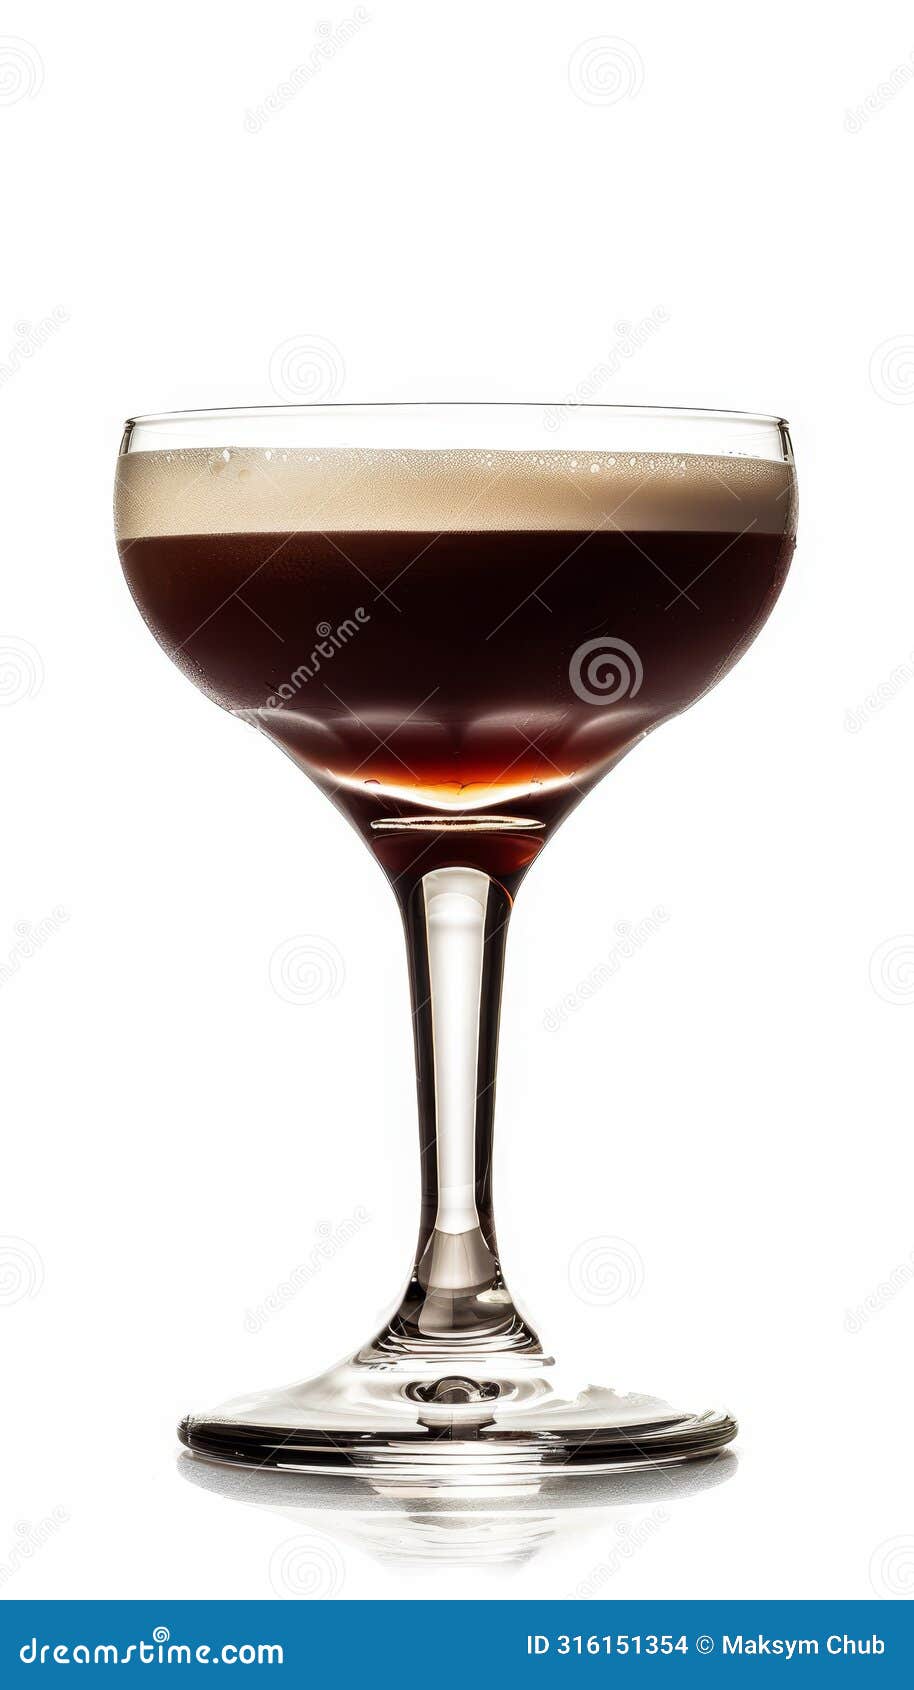 luxurious cocktail in chic glass with vibrant colors on white background exuding refinement